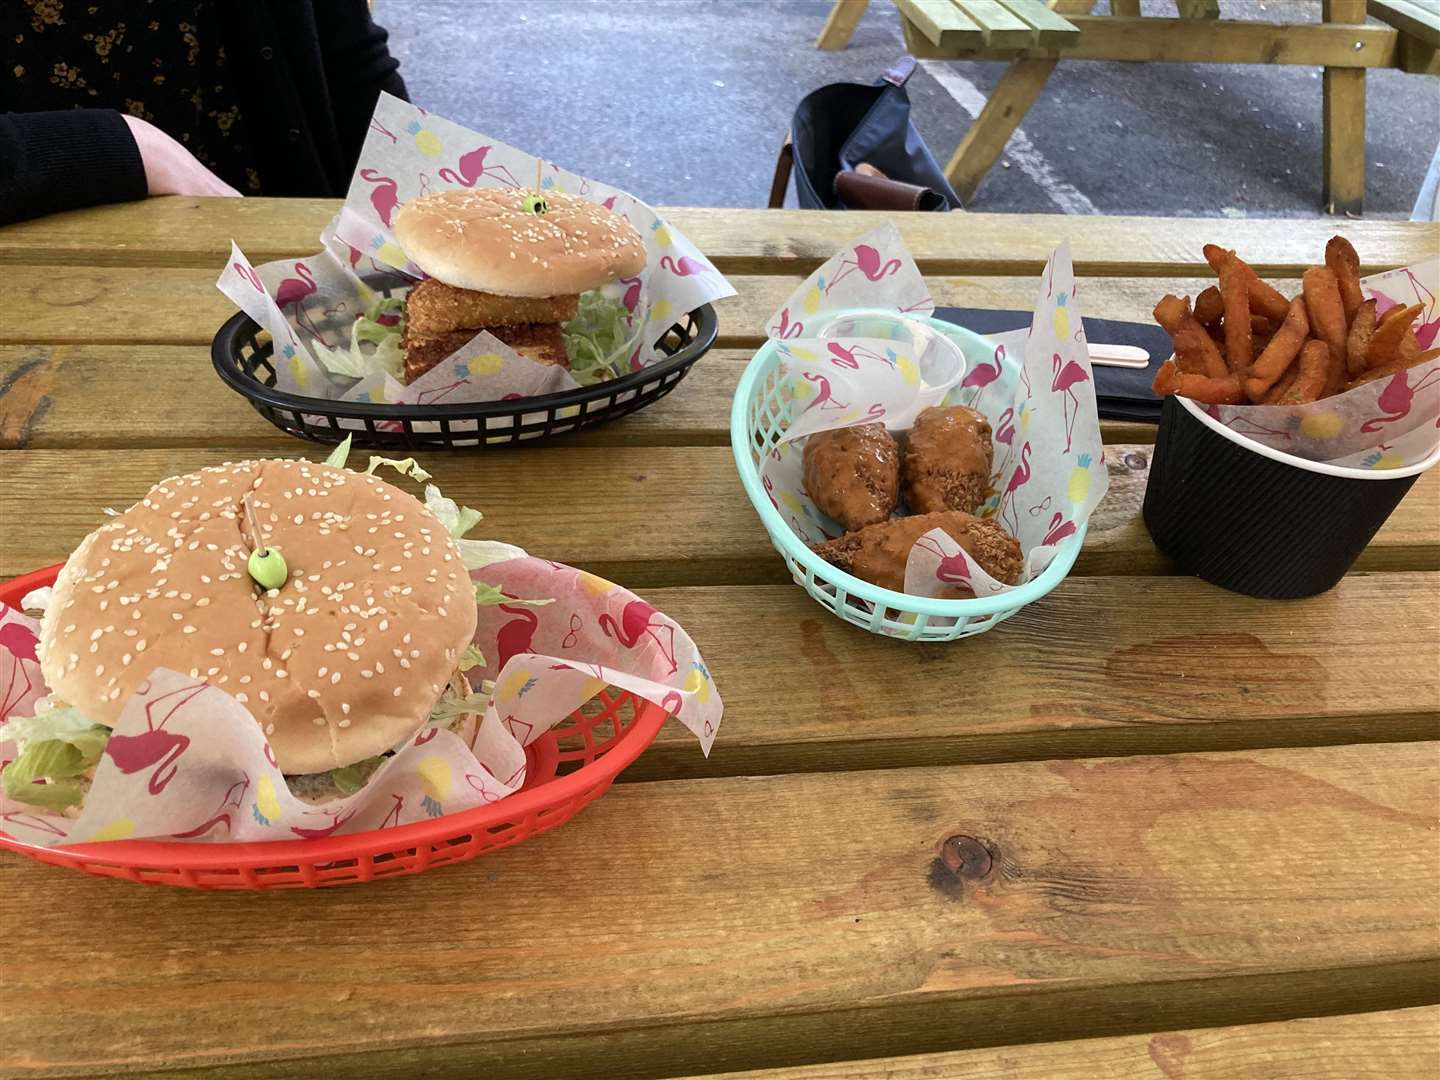 A Big Mock, KFT, jackfruit wingz and sweet potato fries from the Rainbow Skull Grill